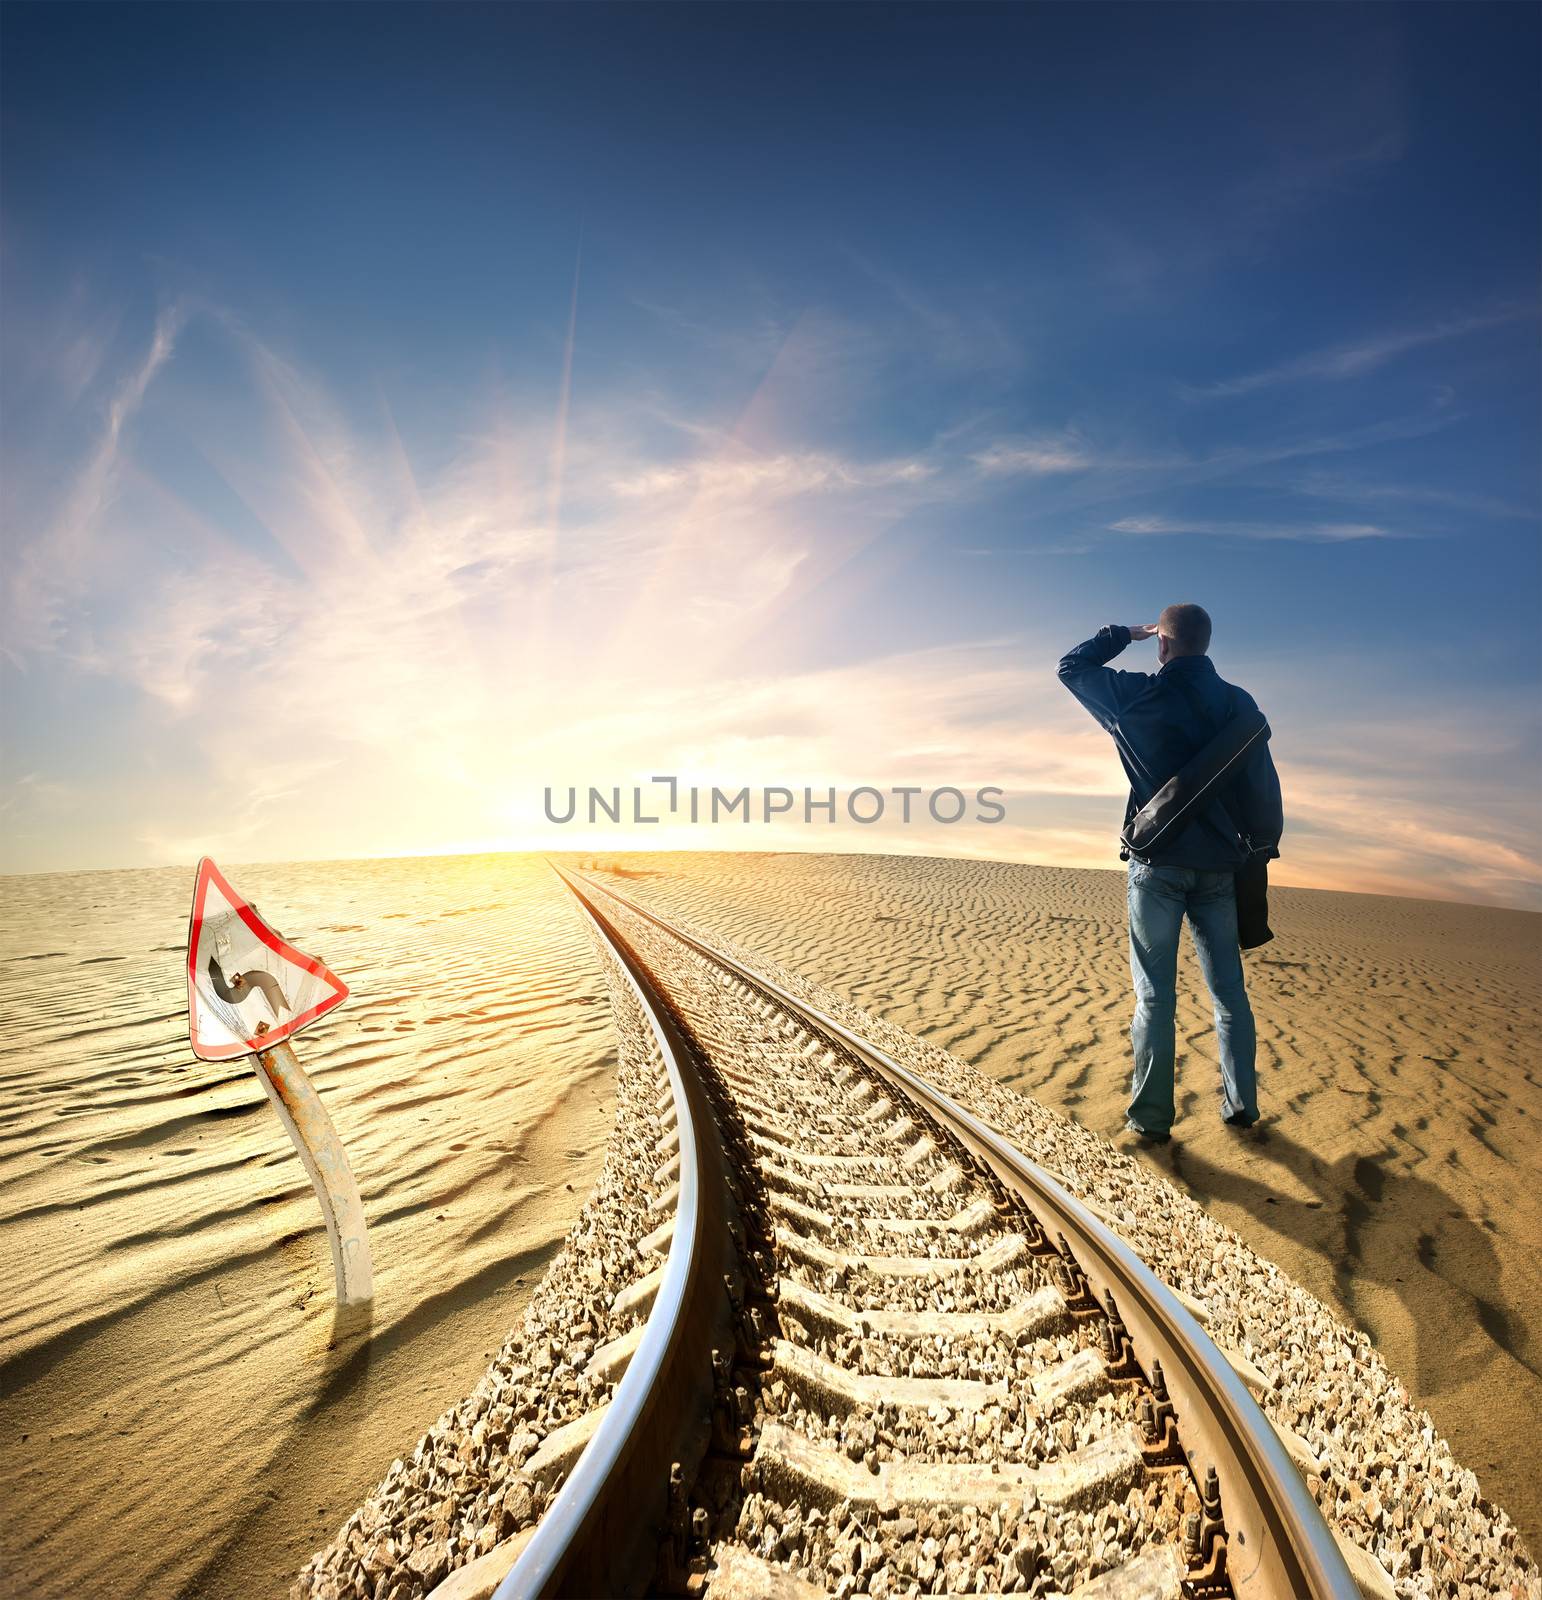 Man and railway in desert by Givaga